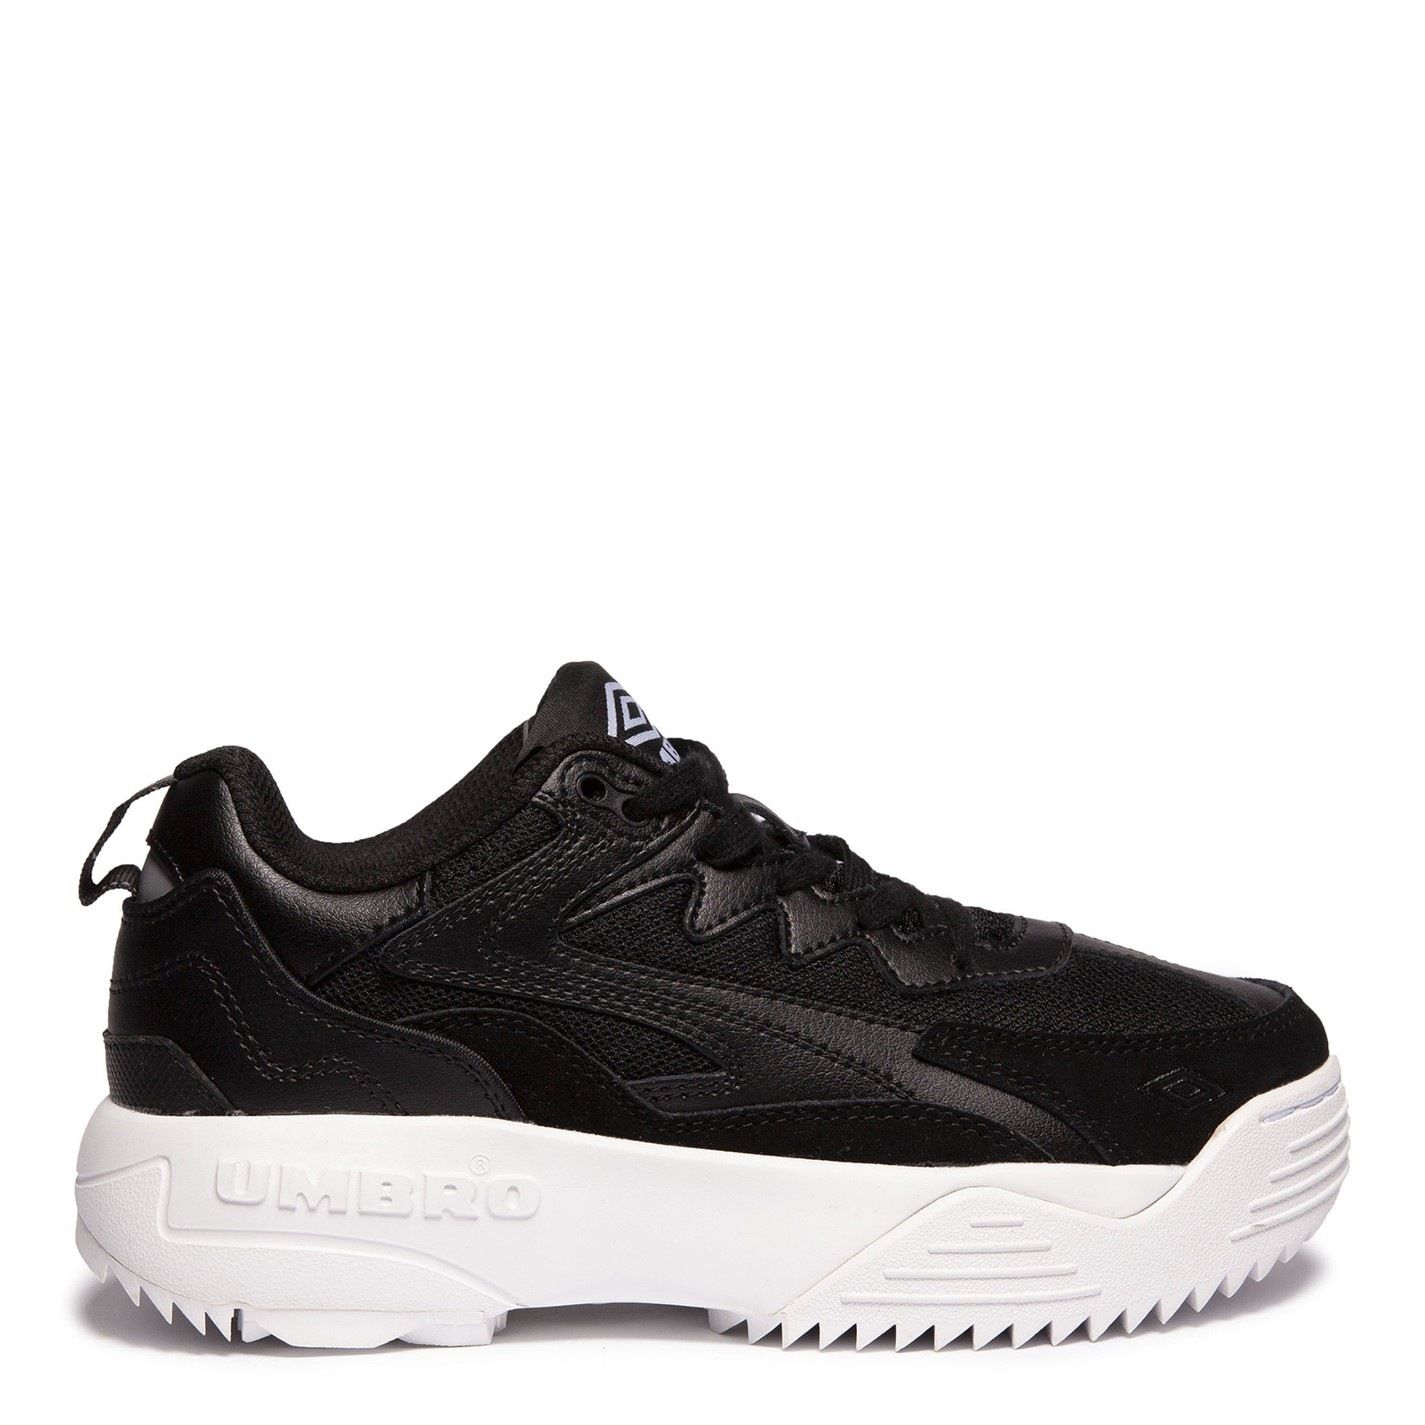 Men’s Exert Max Low Top Leather & Suede Trainers